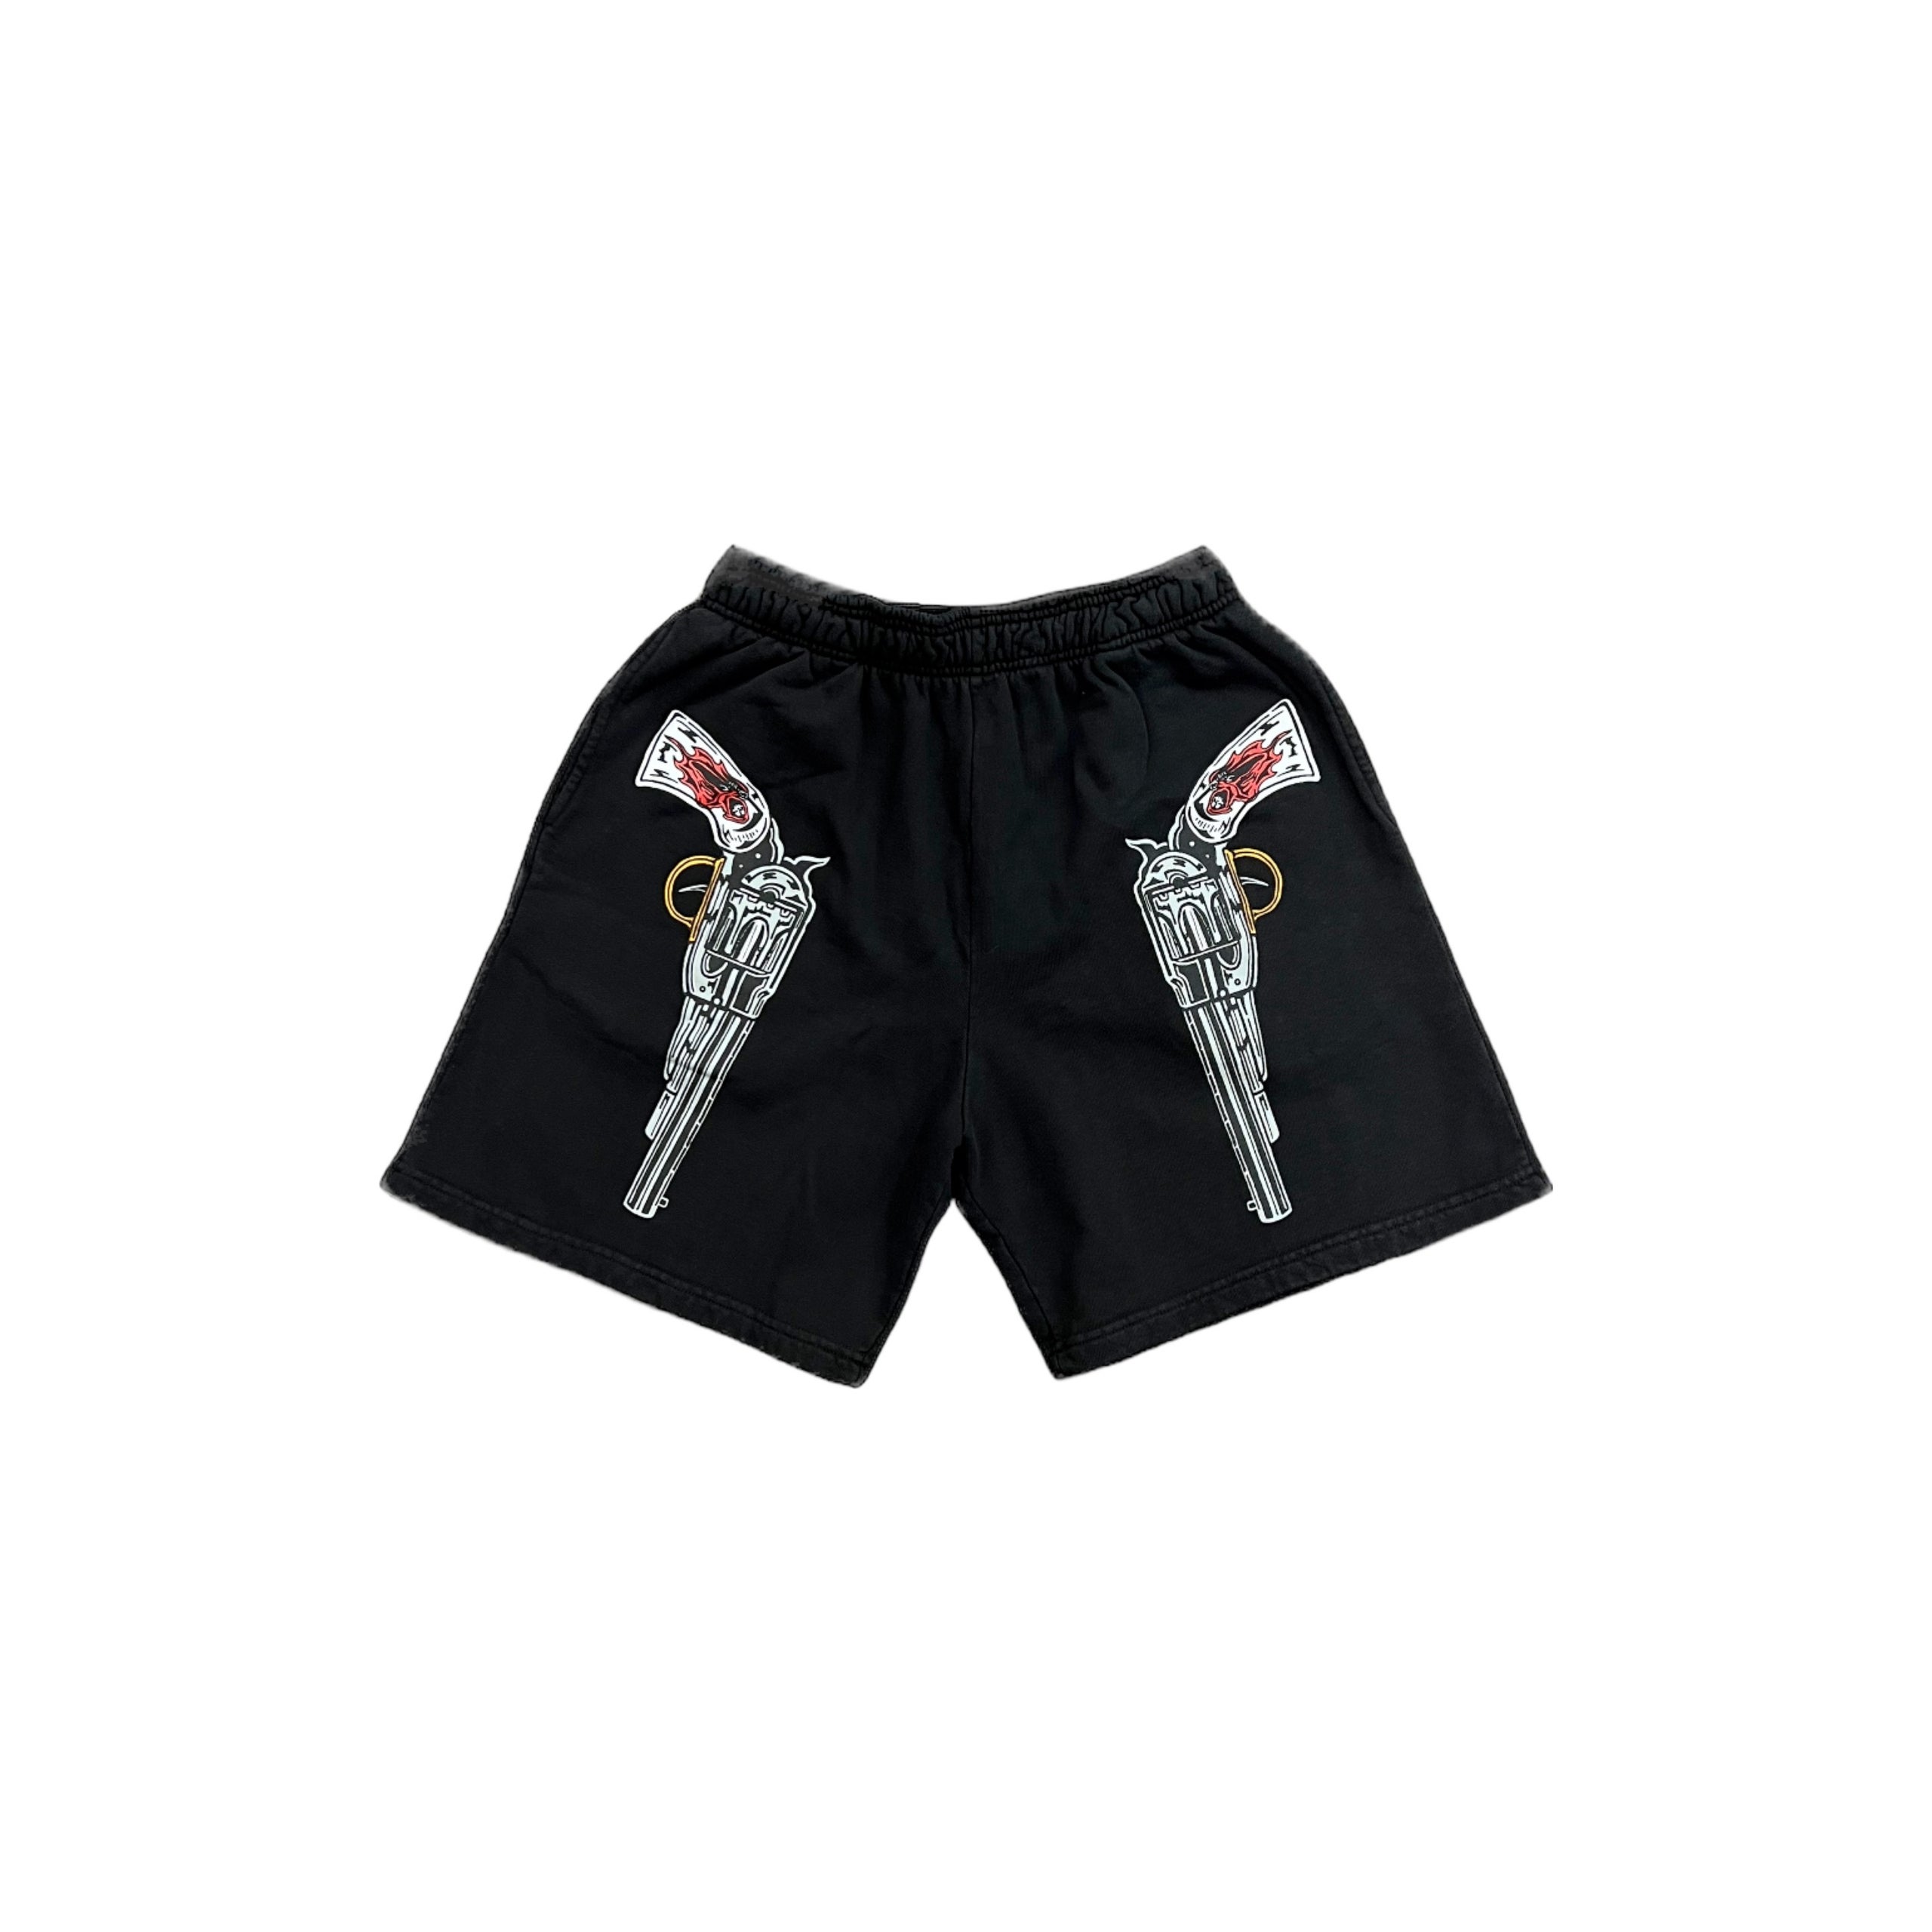 Brand new Warren Lotas Son of The Valley Shorts size S for $225 now  available in store!!!